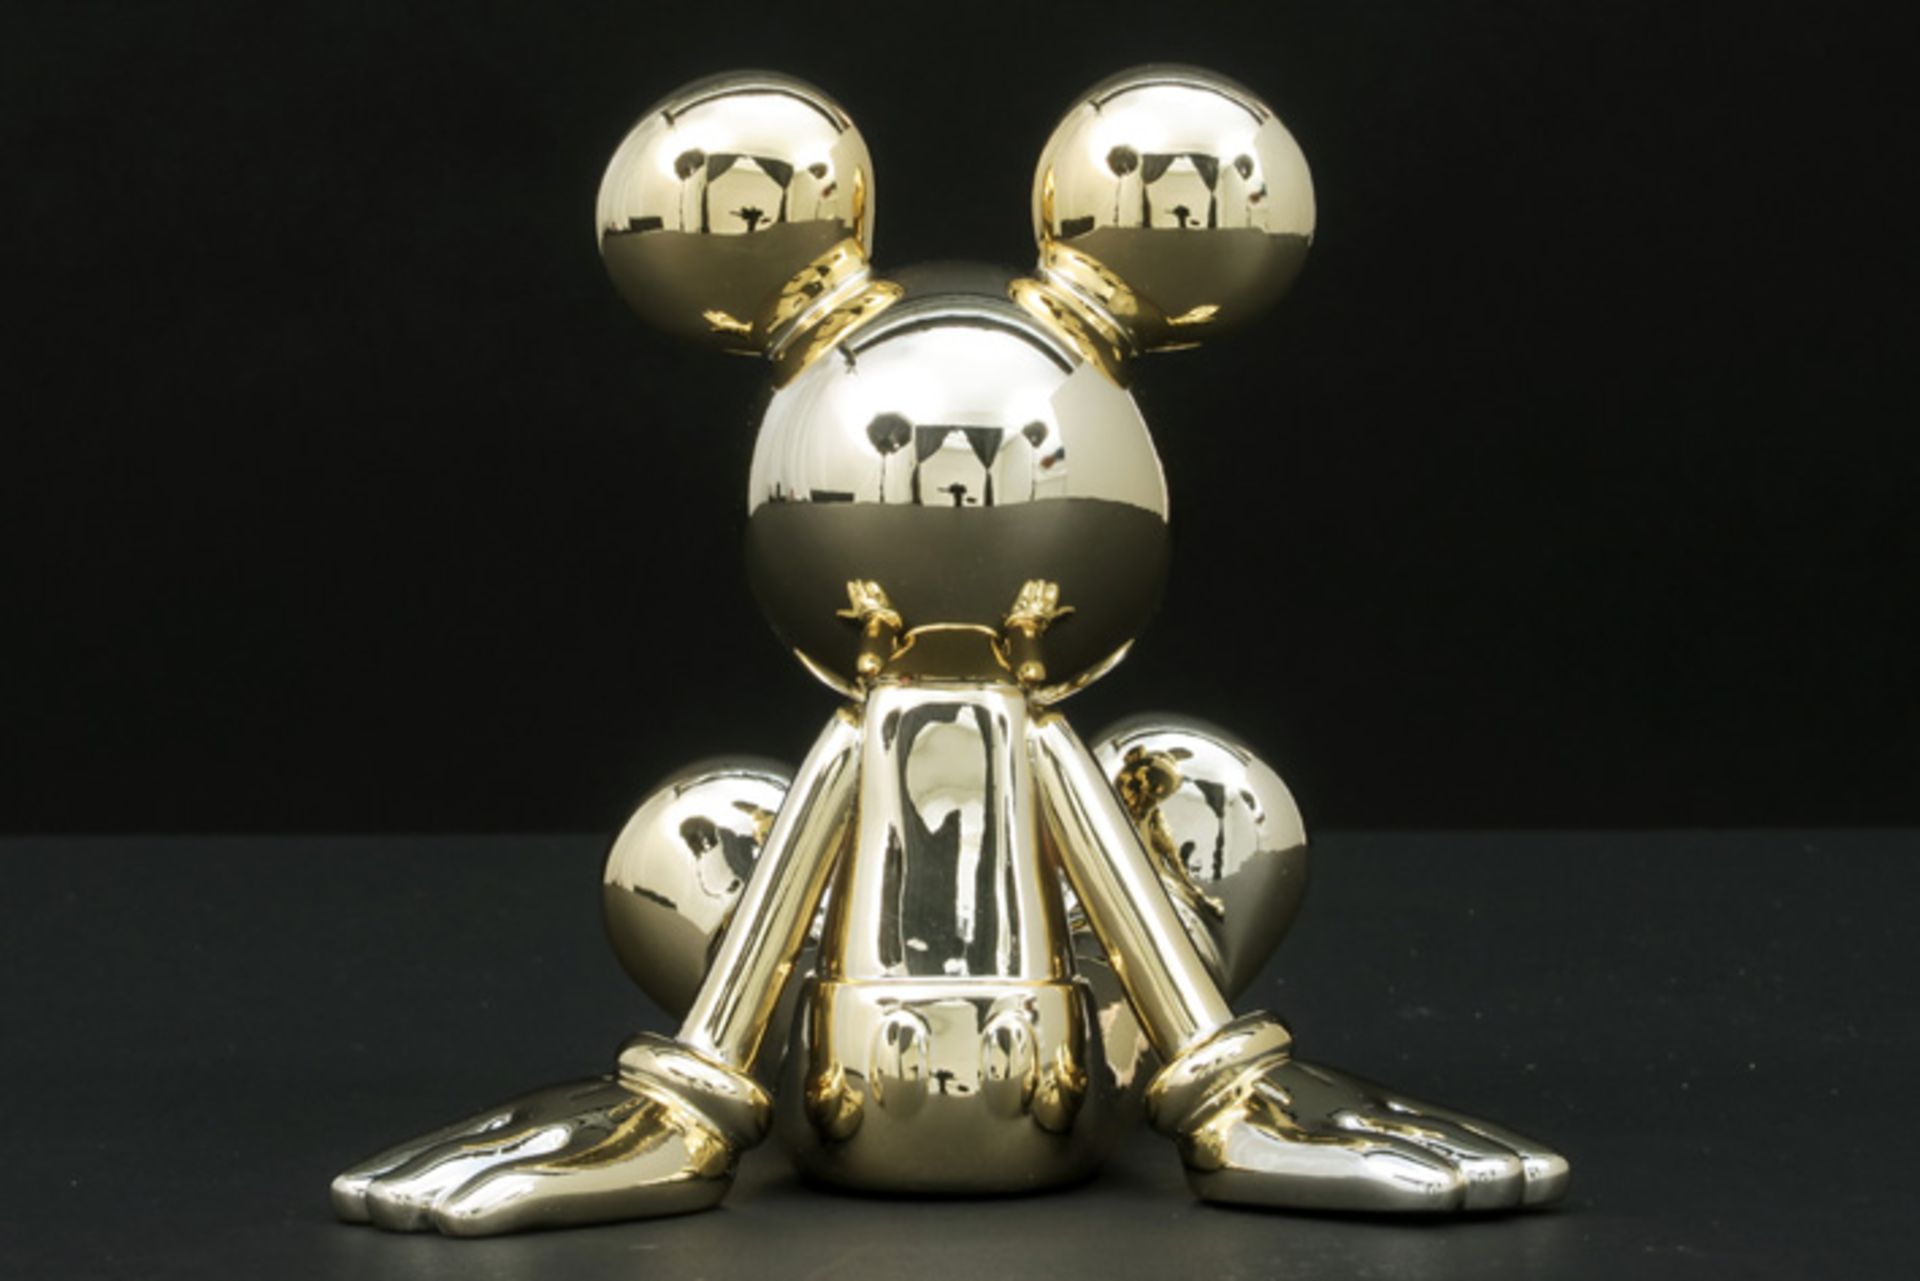 Marcel Wanders "sitting Mickey" sculpture in resin - marked and with certificate||WANDERS - Image 4 of 5